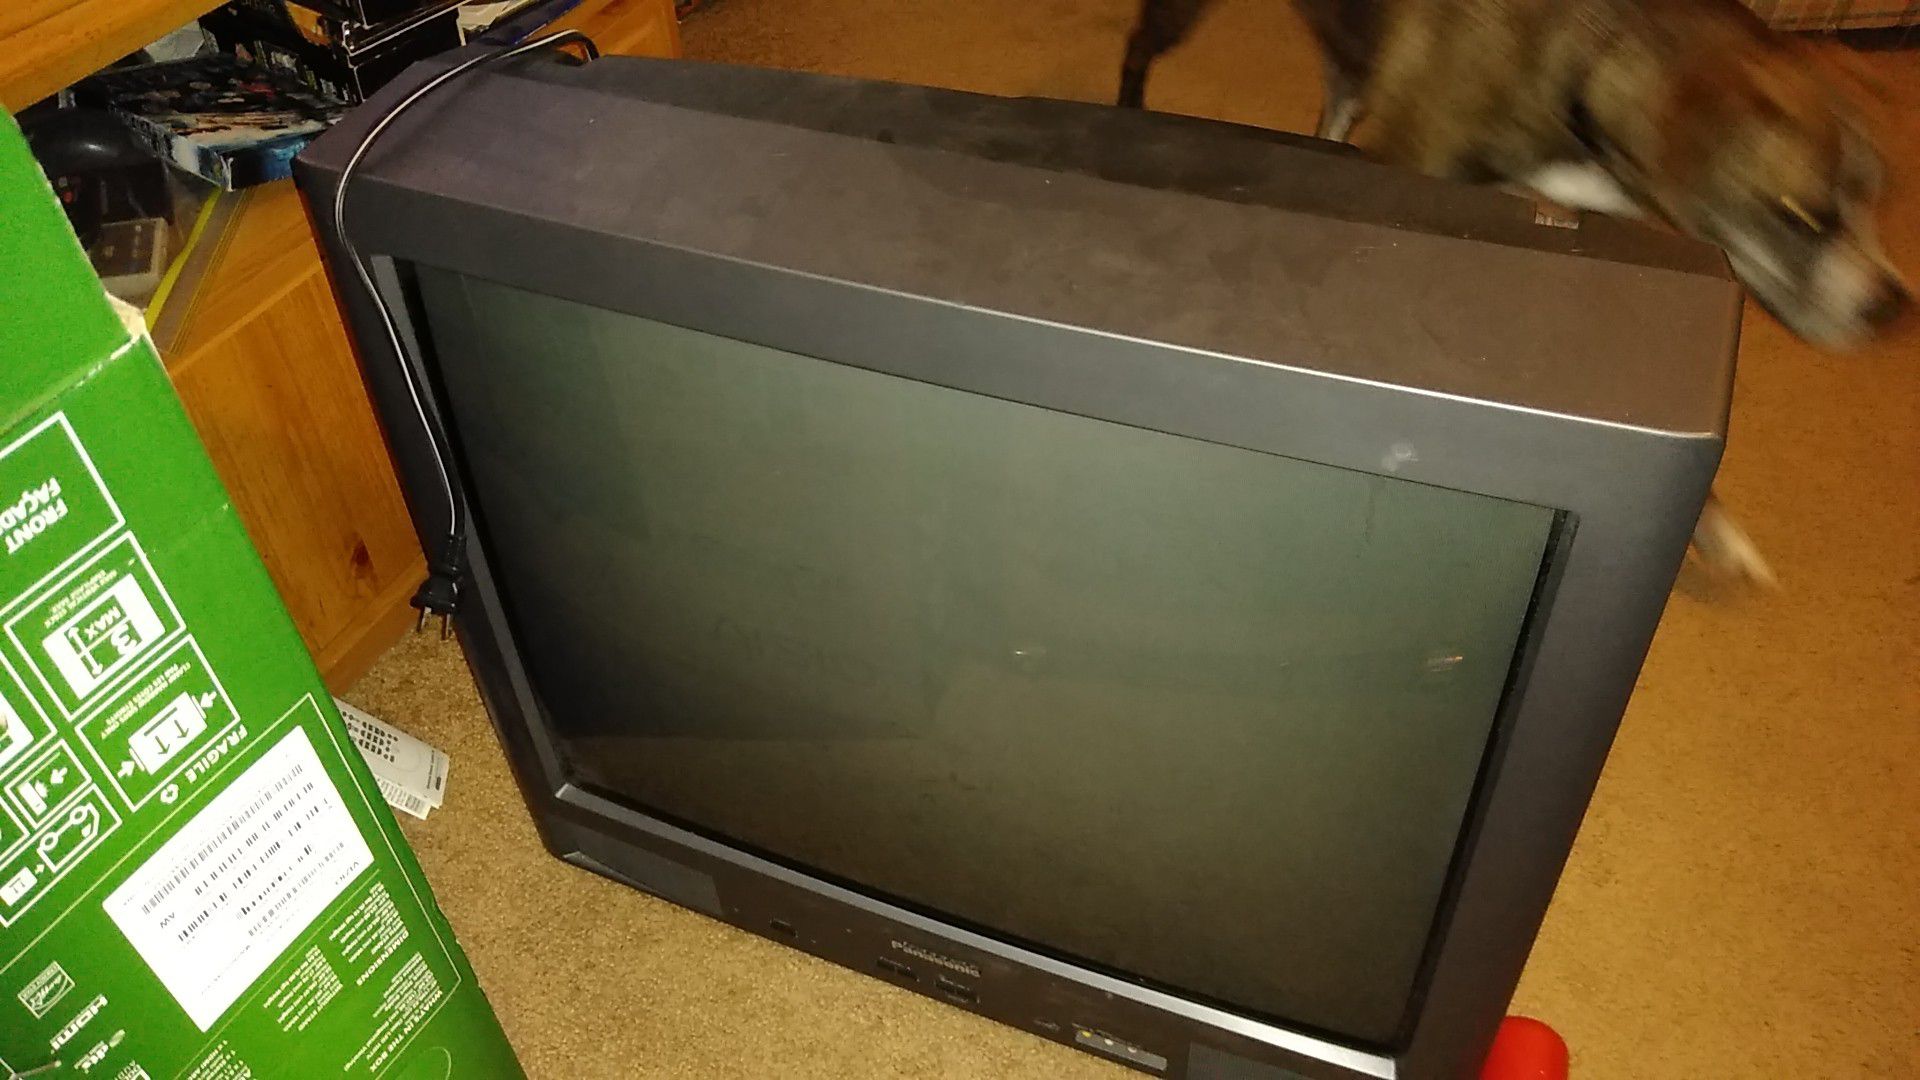 Panasonic original flat screen it works must be able to pick up and hall away it's heavy. You can text me at {contact info removed} for pick up